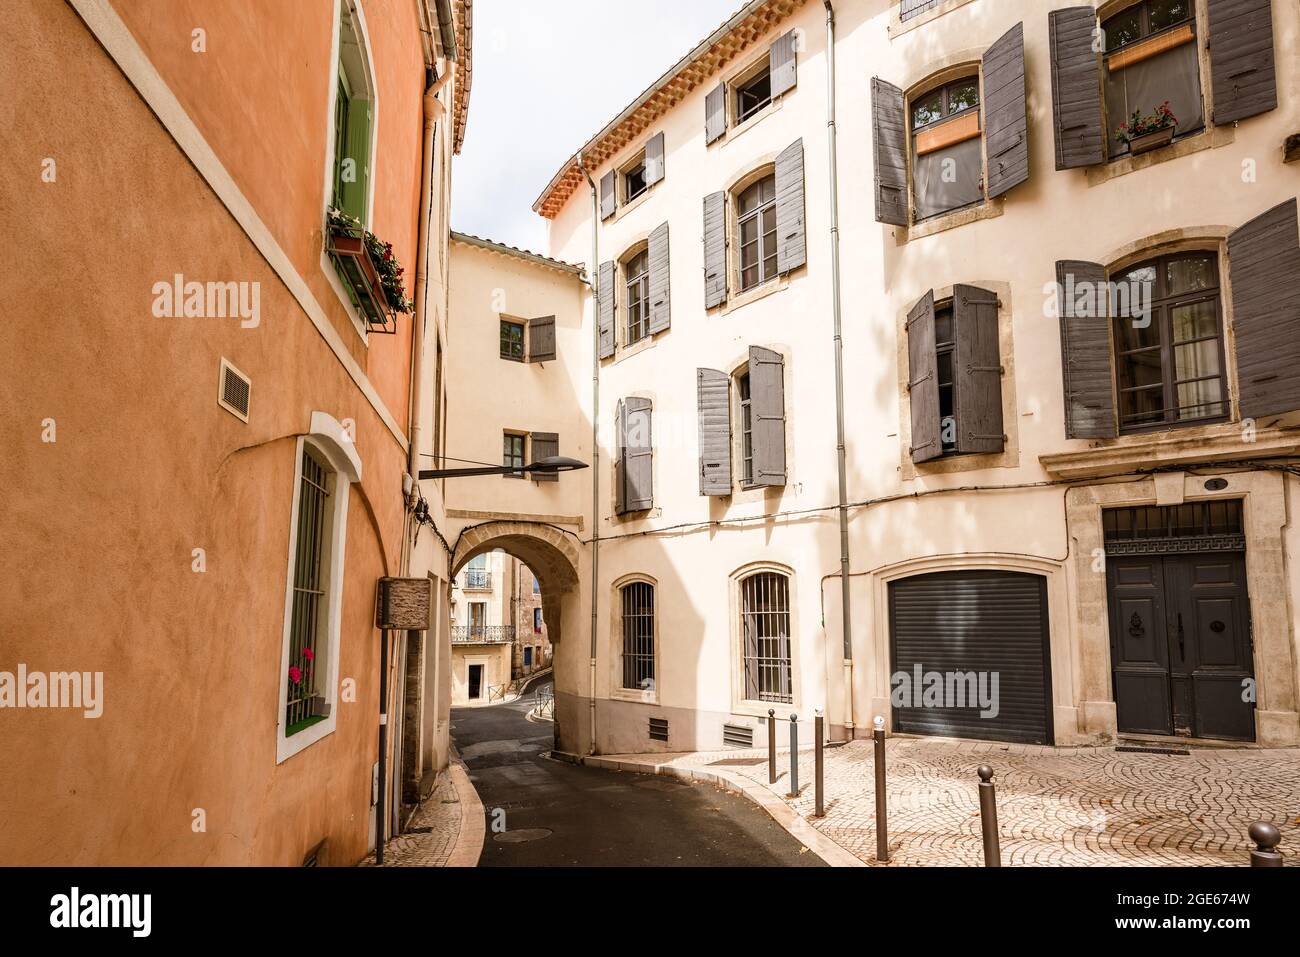 Picturesque street in French city, Béziers, France. Stock Photo